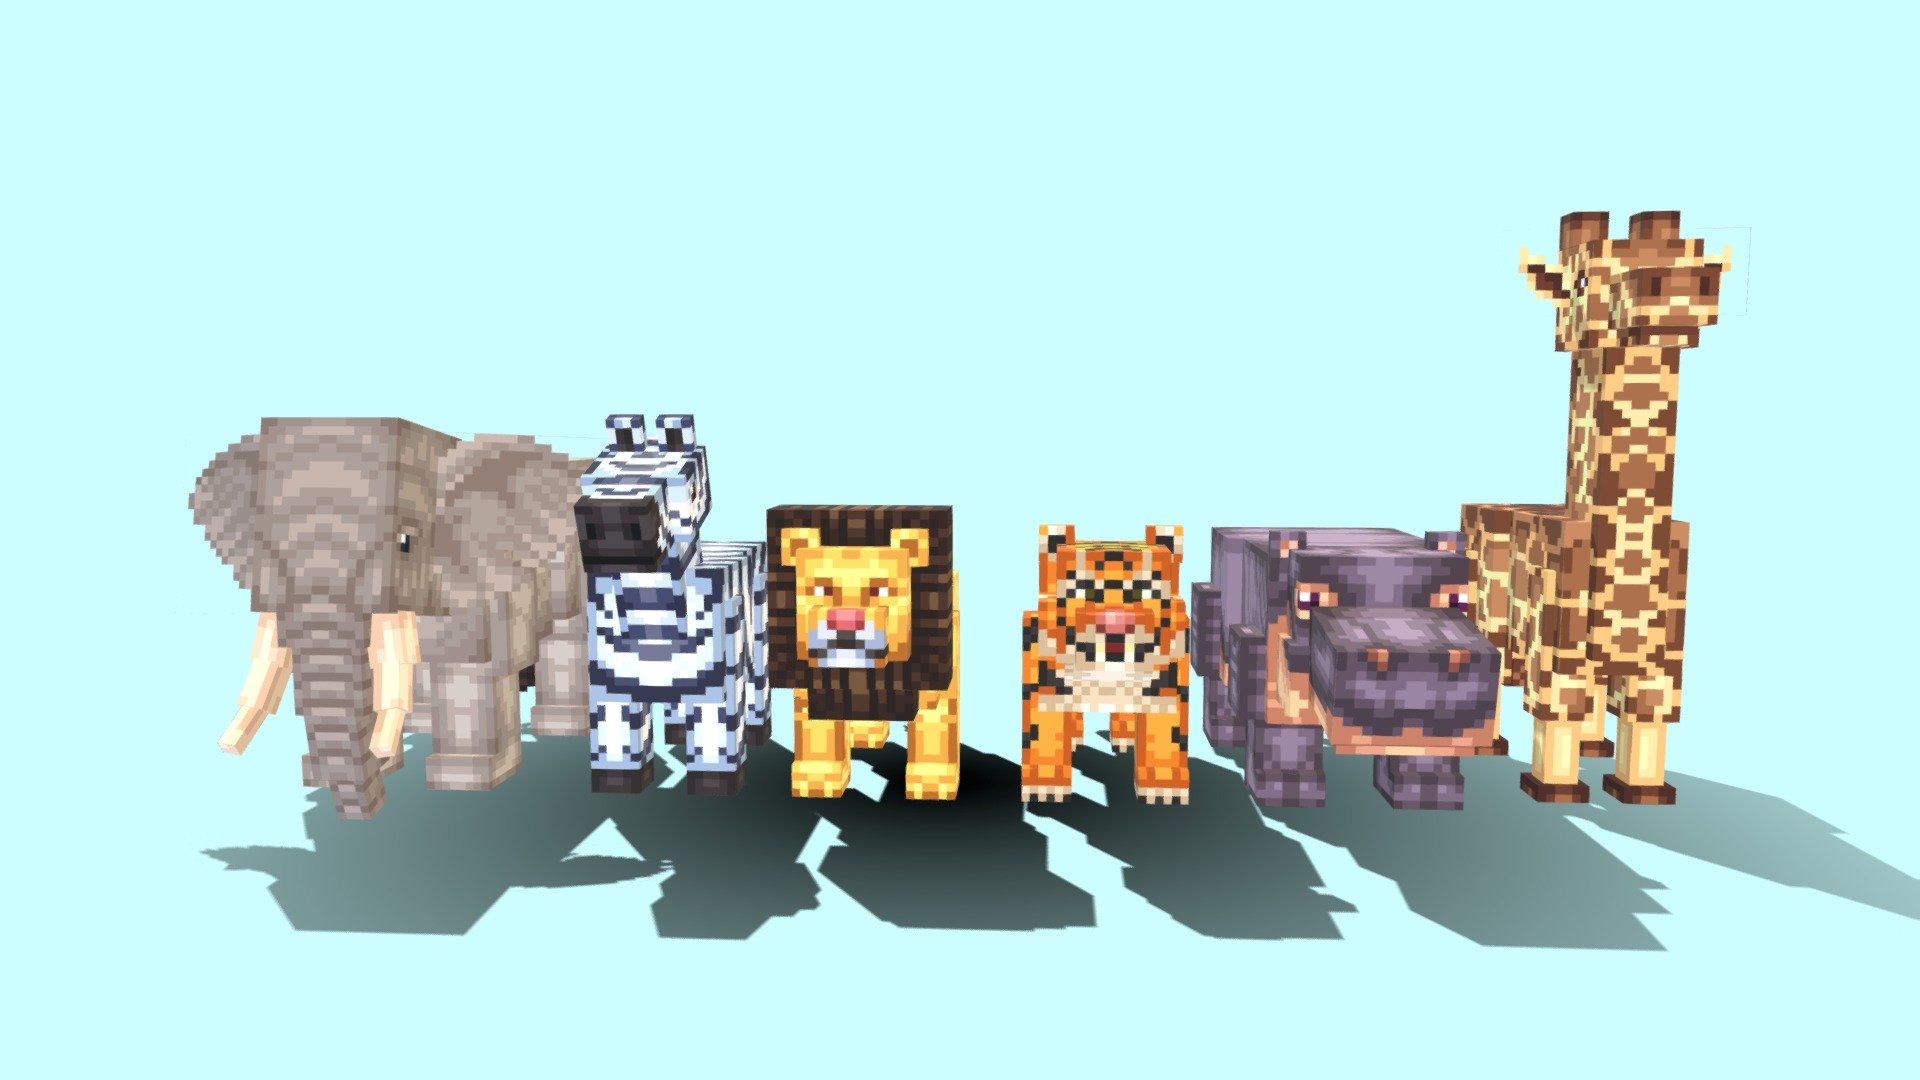 These are a few of my latest 3D models made in blockbench. I hope you like it! - Zoo Animals - 3D model by Fyrtarn (@ArtistFyrtarn) 3d model